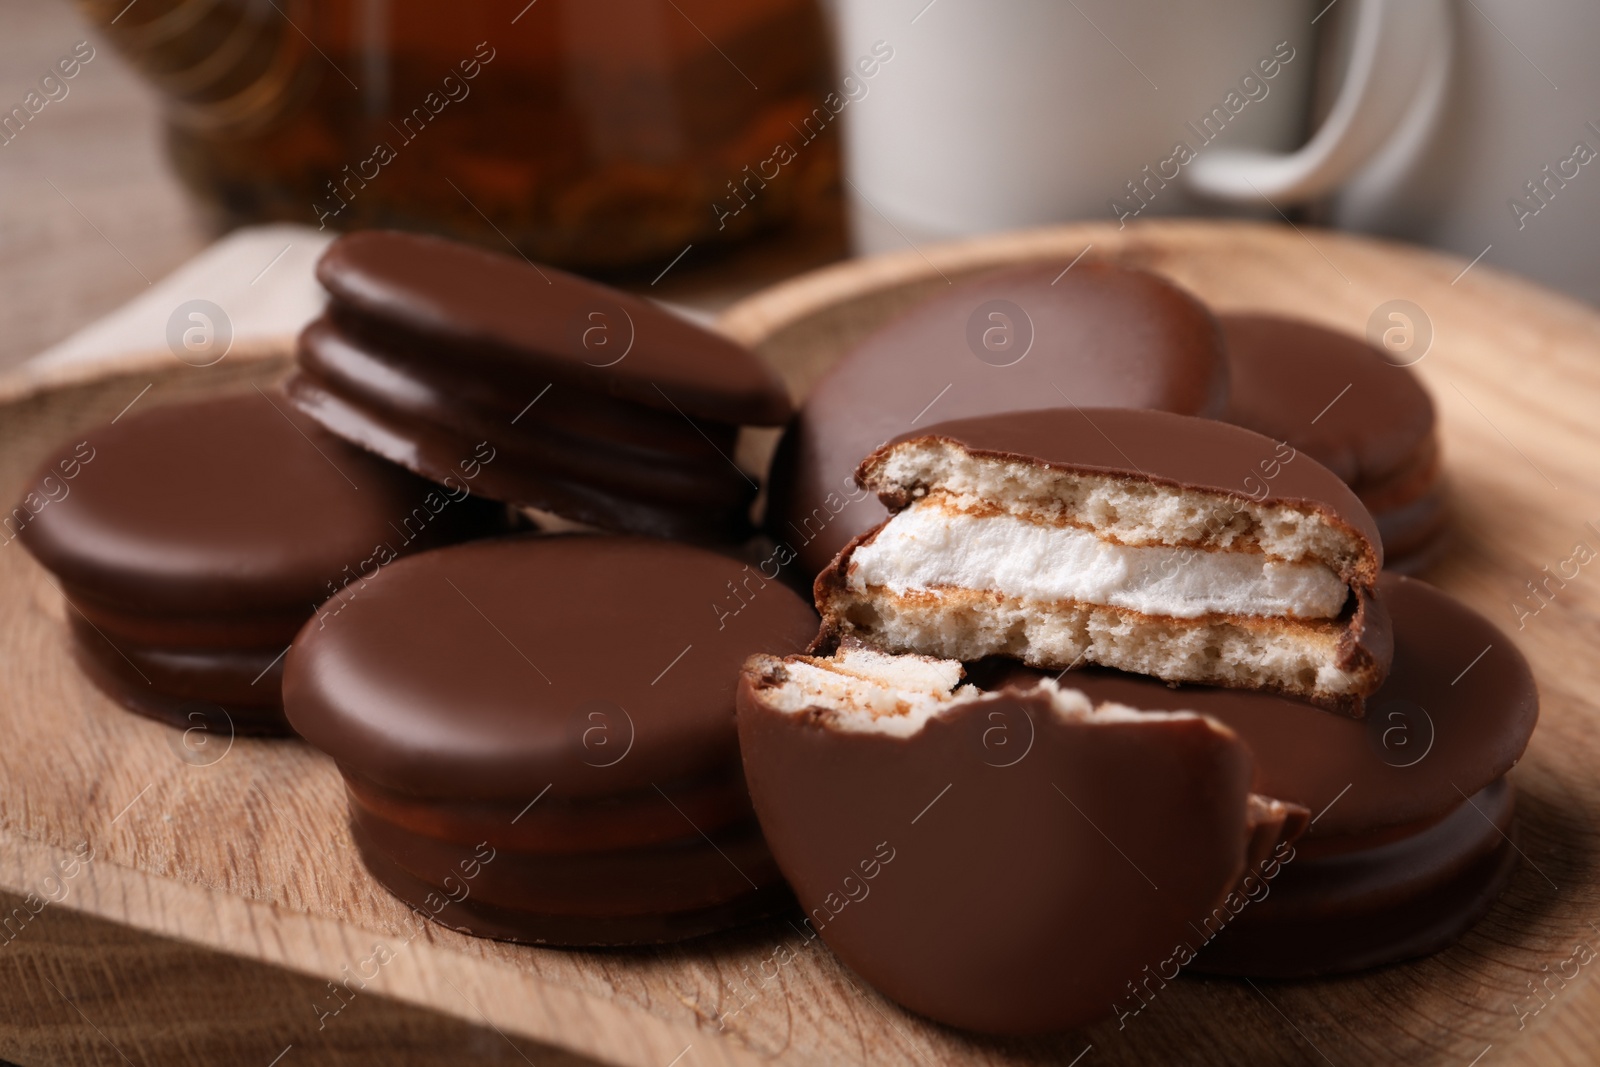 Photo of Tasty choco pies on wooden plate, closeup view